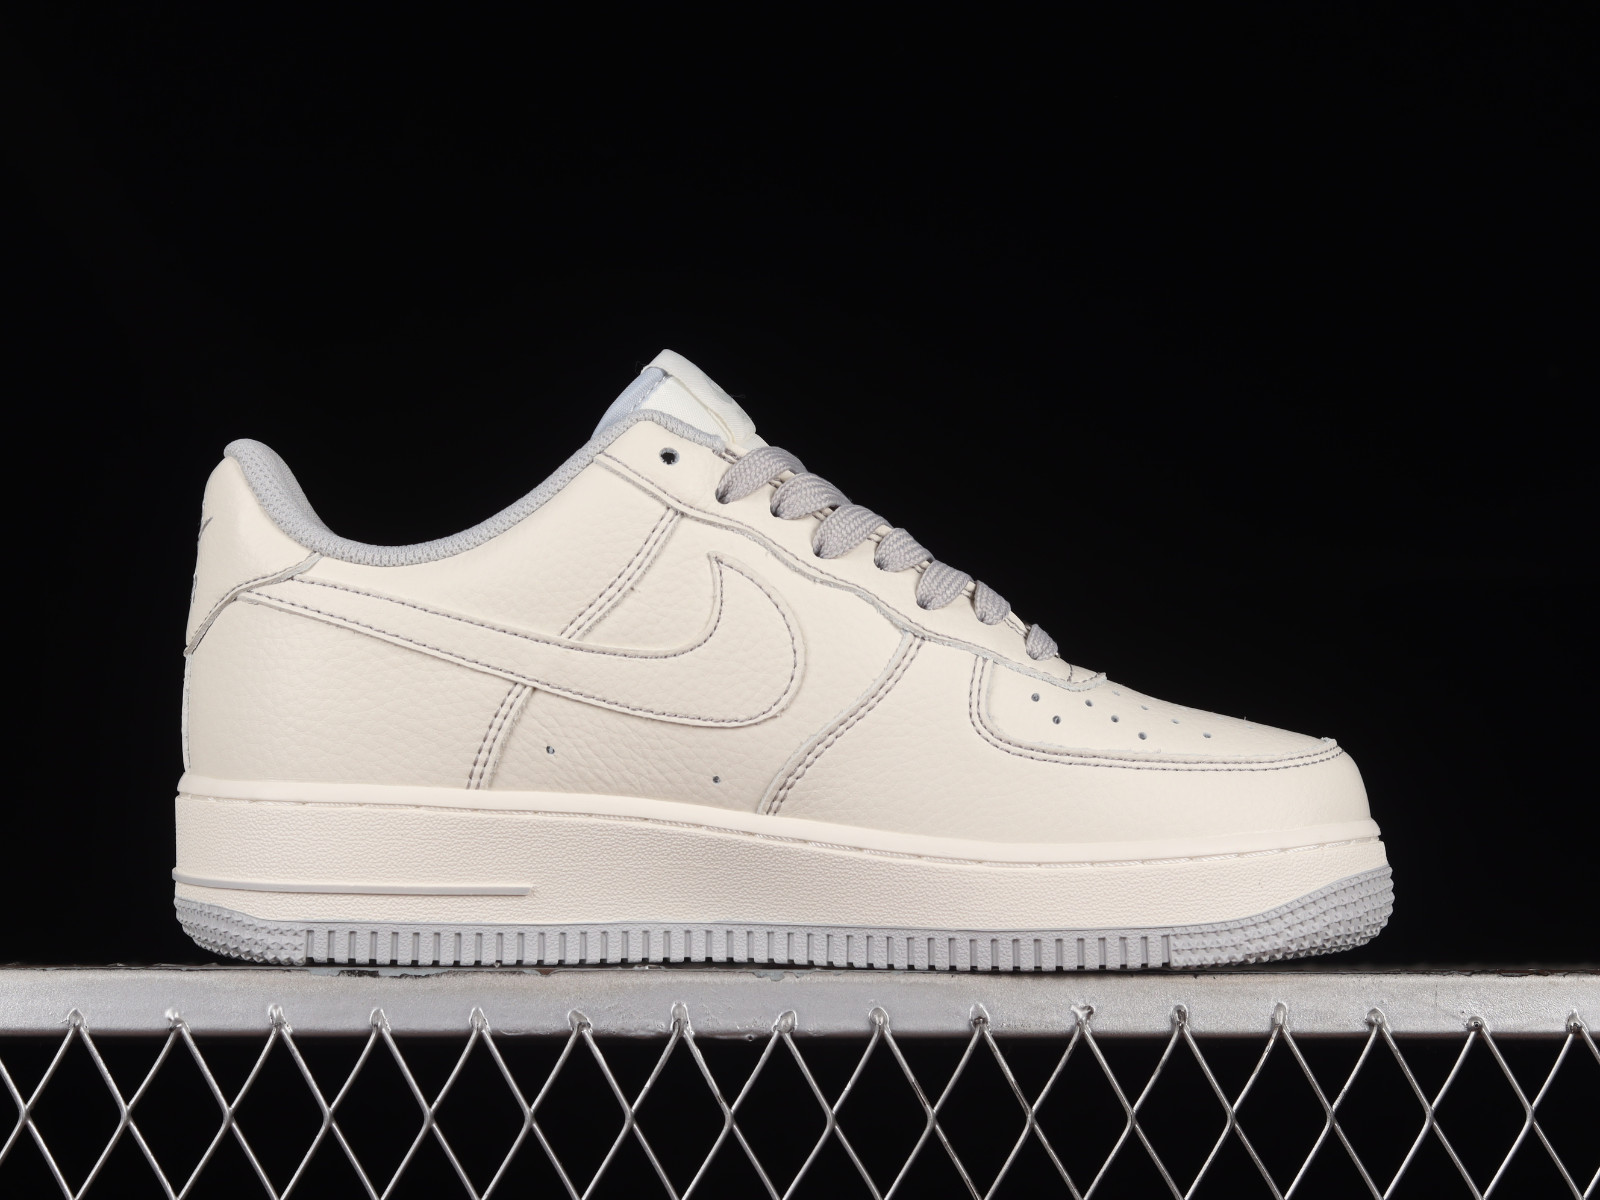 Agente Relativamente Adepto nike torch sl mens to womens conversion time zone -  MultiscaleconsultingShops - 666 - Undefeated x Nike Air Force 1 07 Low  Beige Light Grey Sliver UN1988